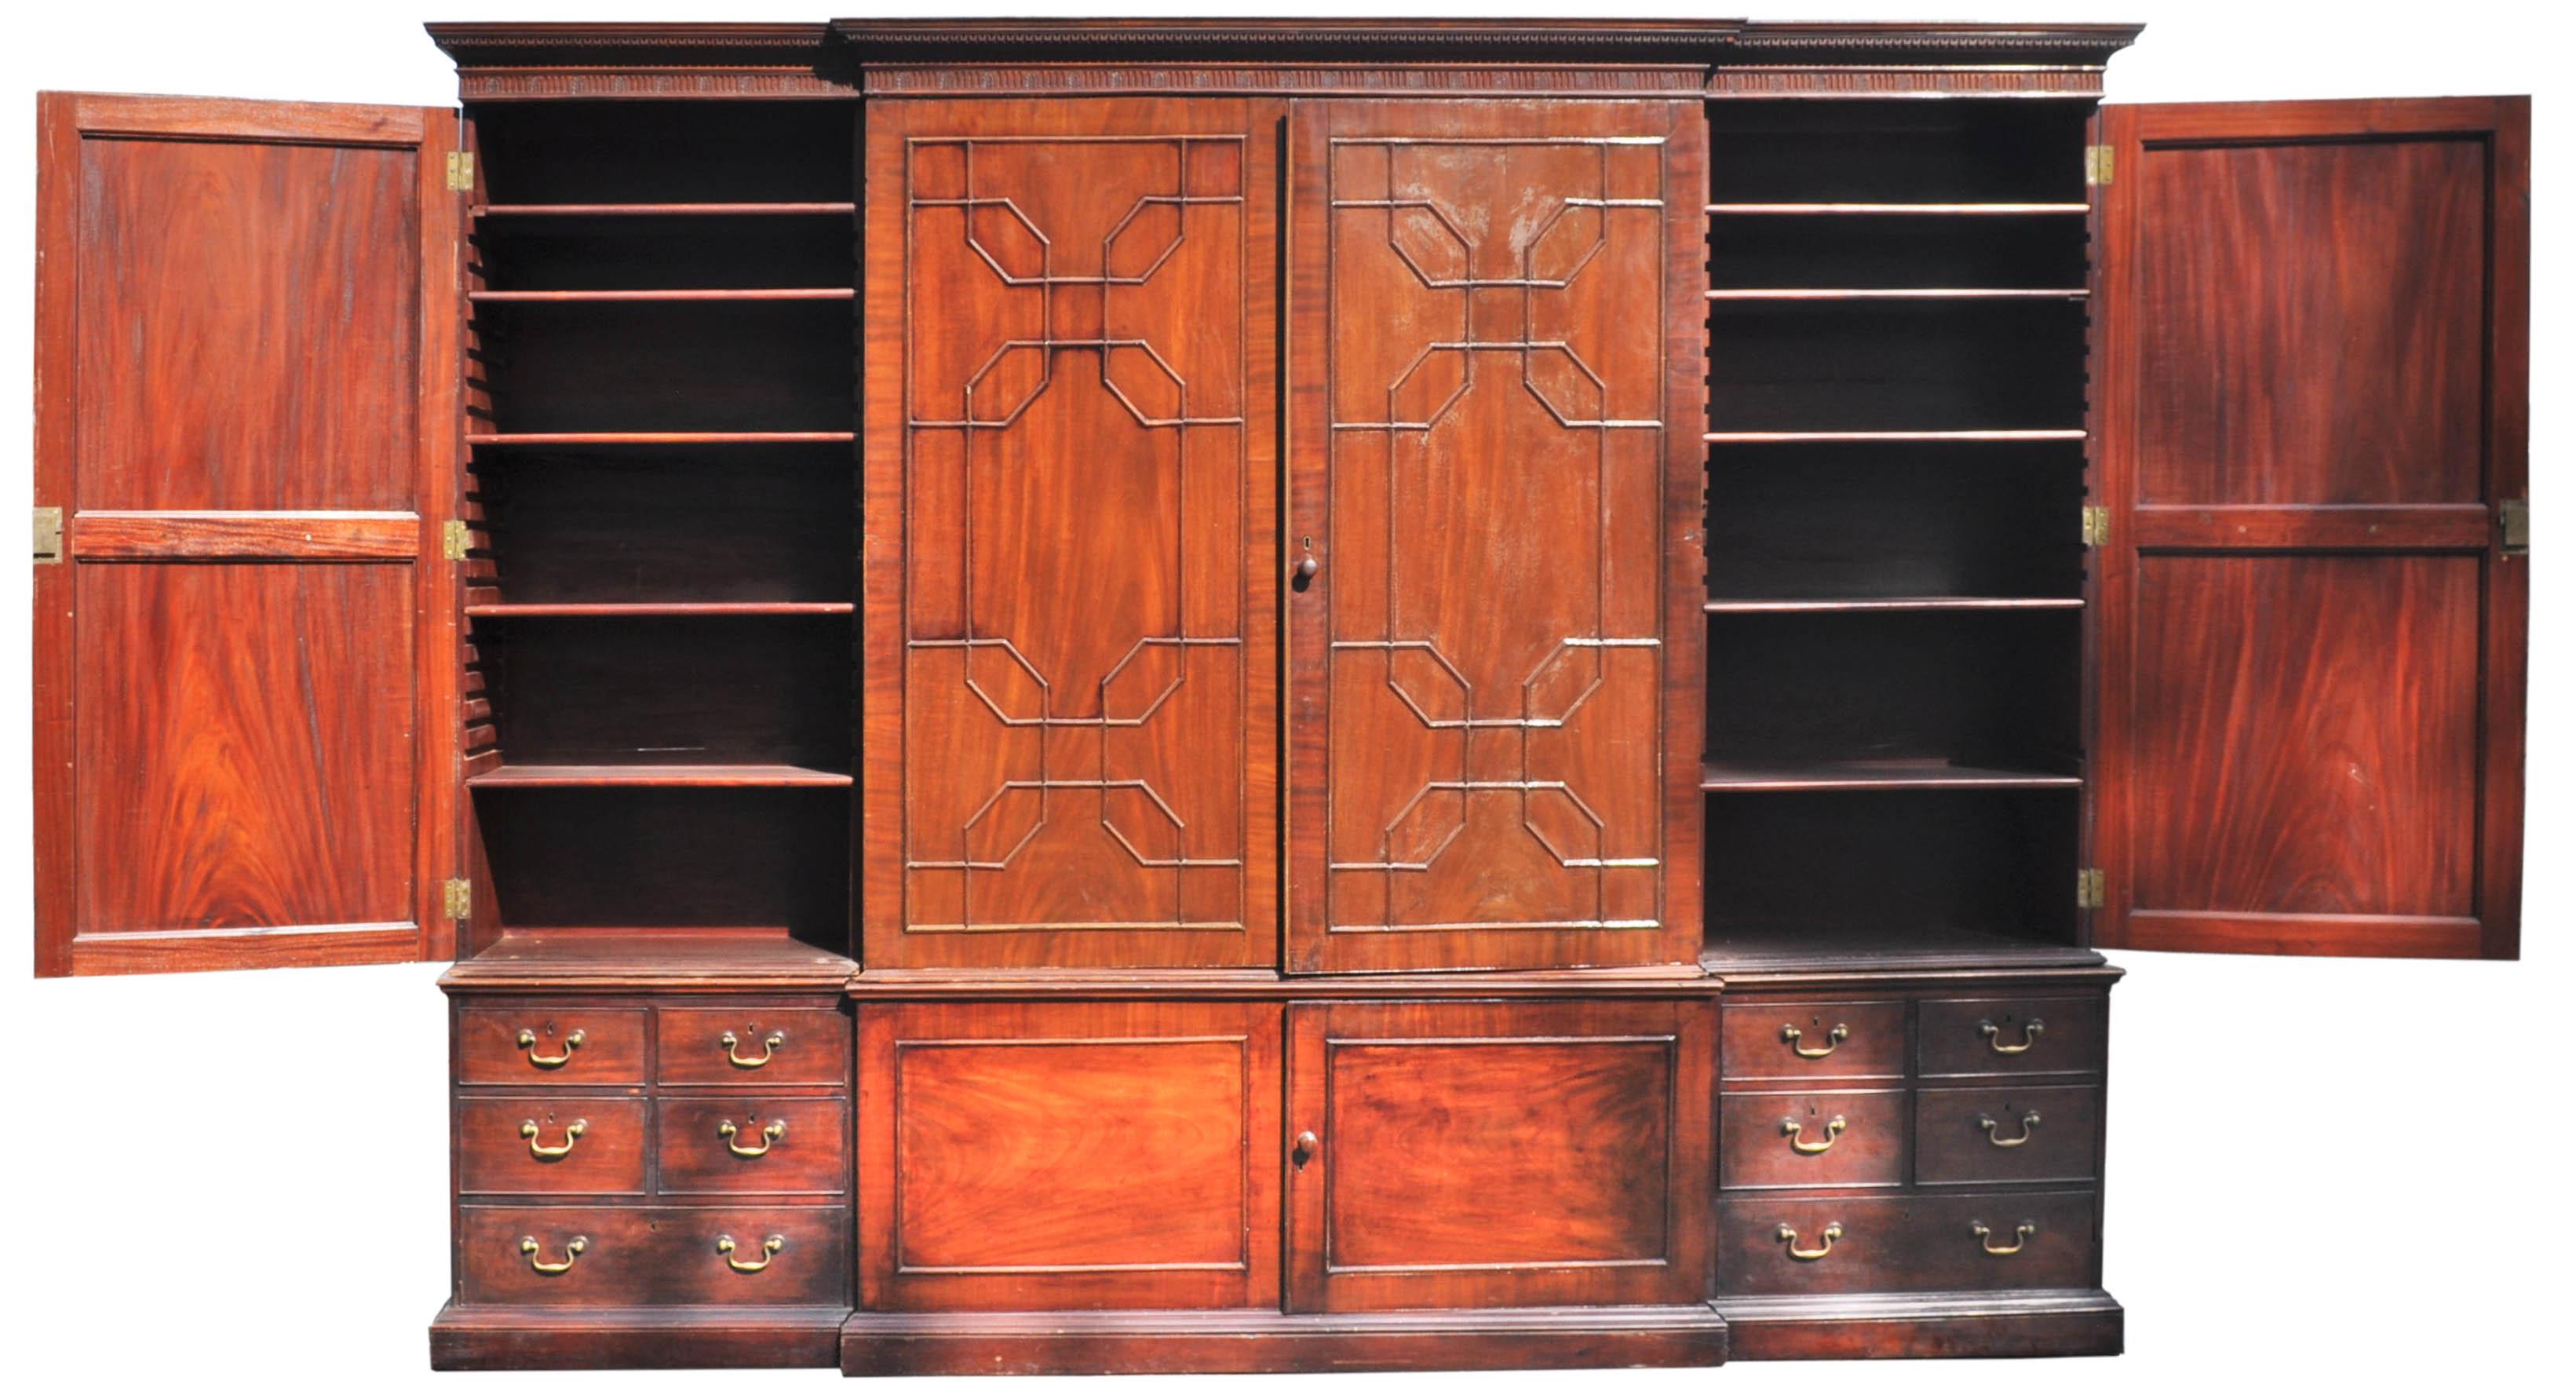 Monumental Georgian Antique Mahogany Breakfront Bibliotheque Library Bookcase 2